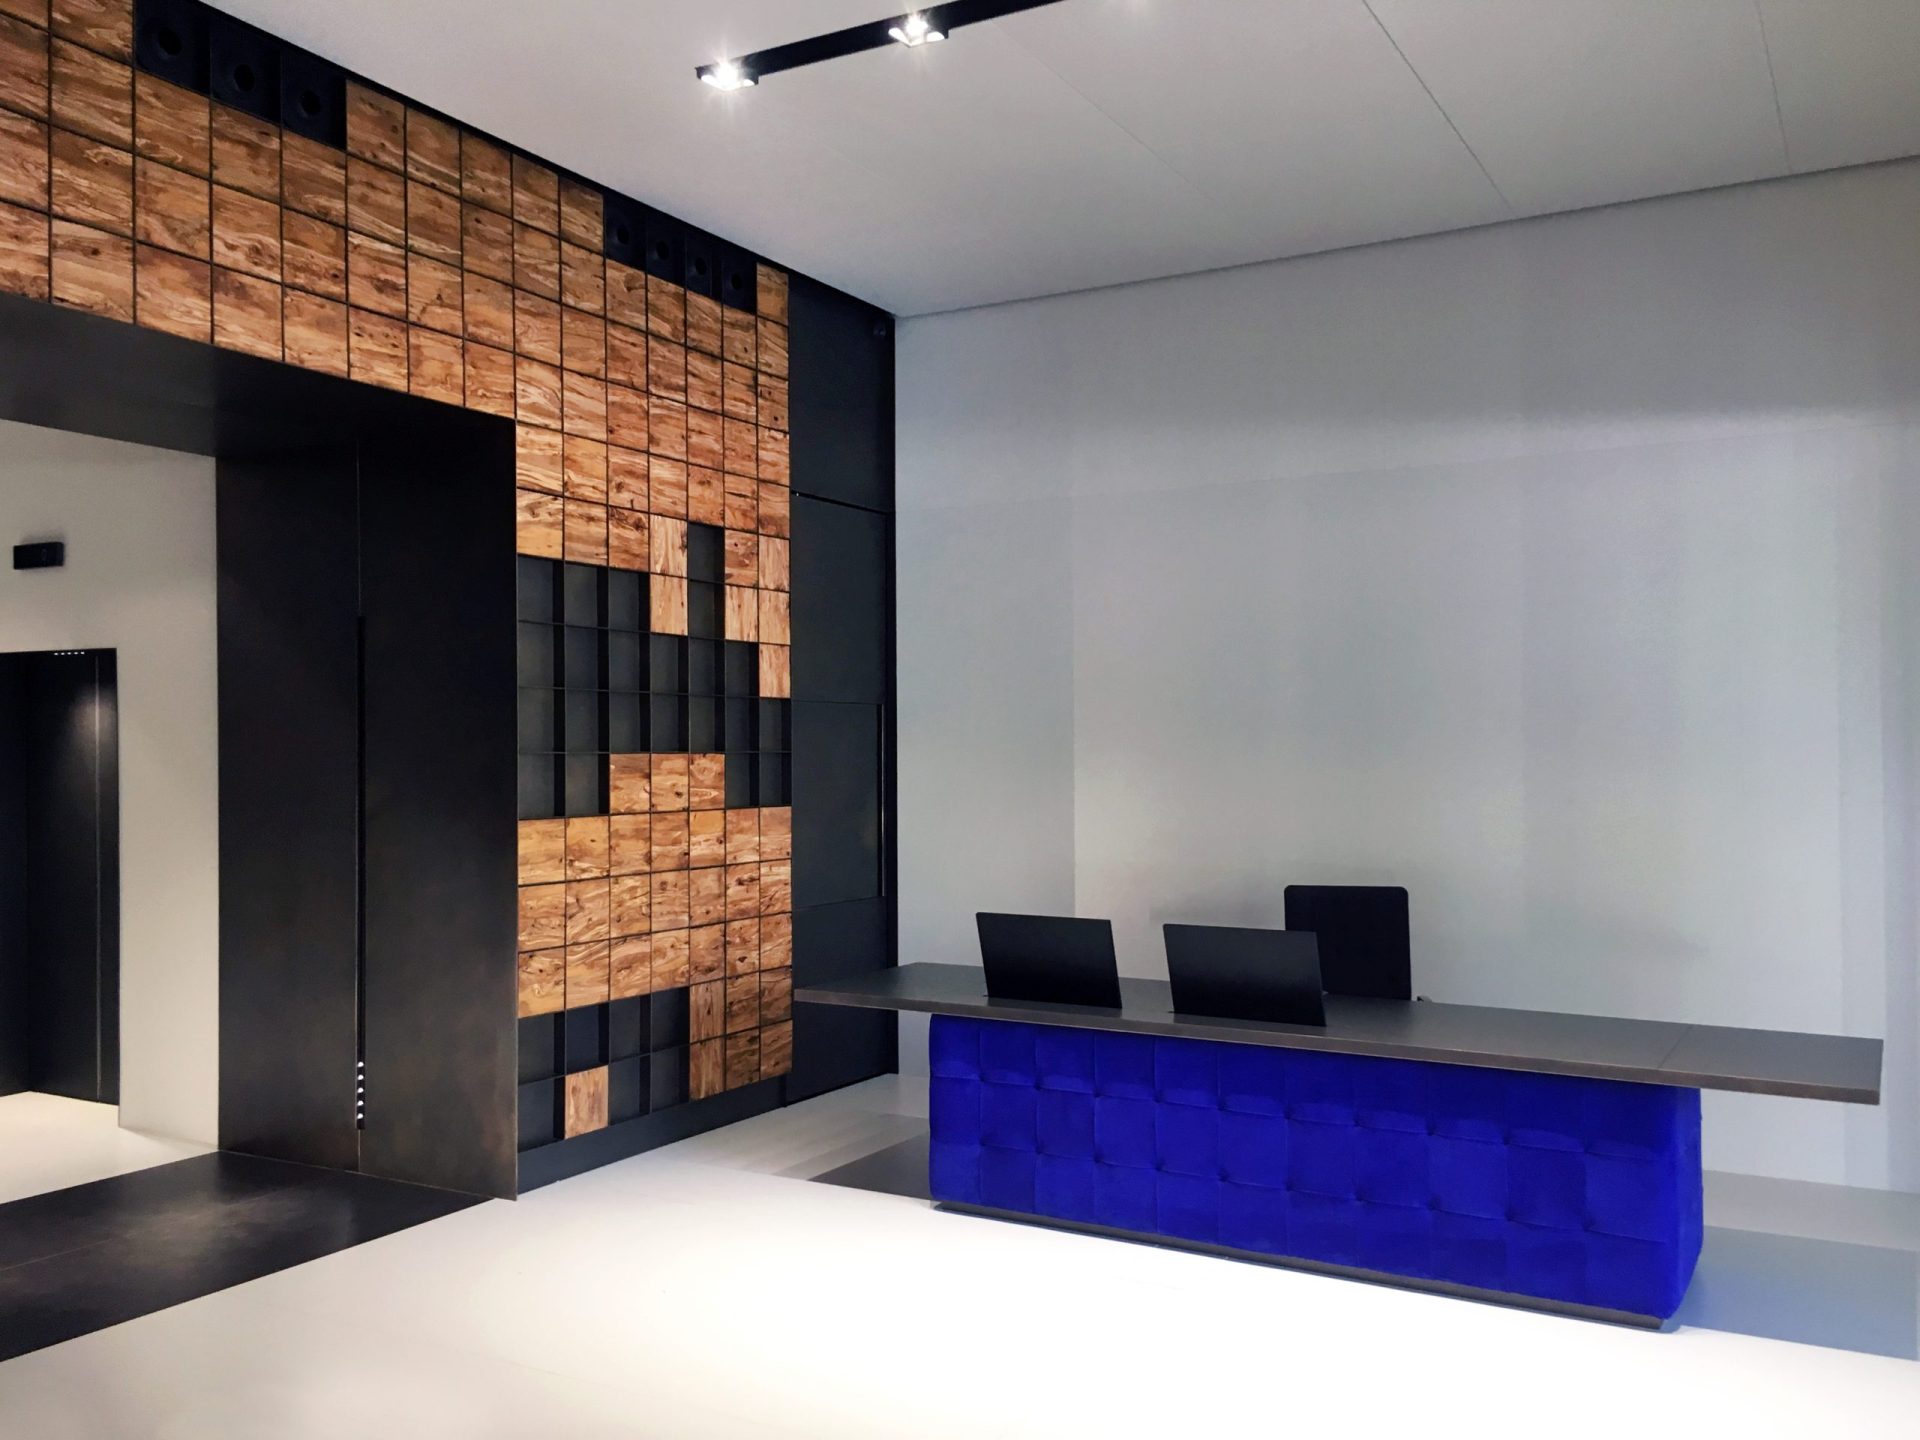 Lobby with metal wall and world map made of wooden squares